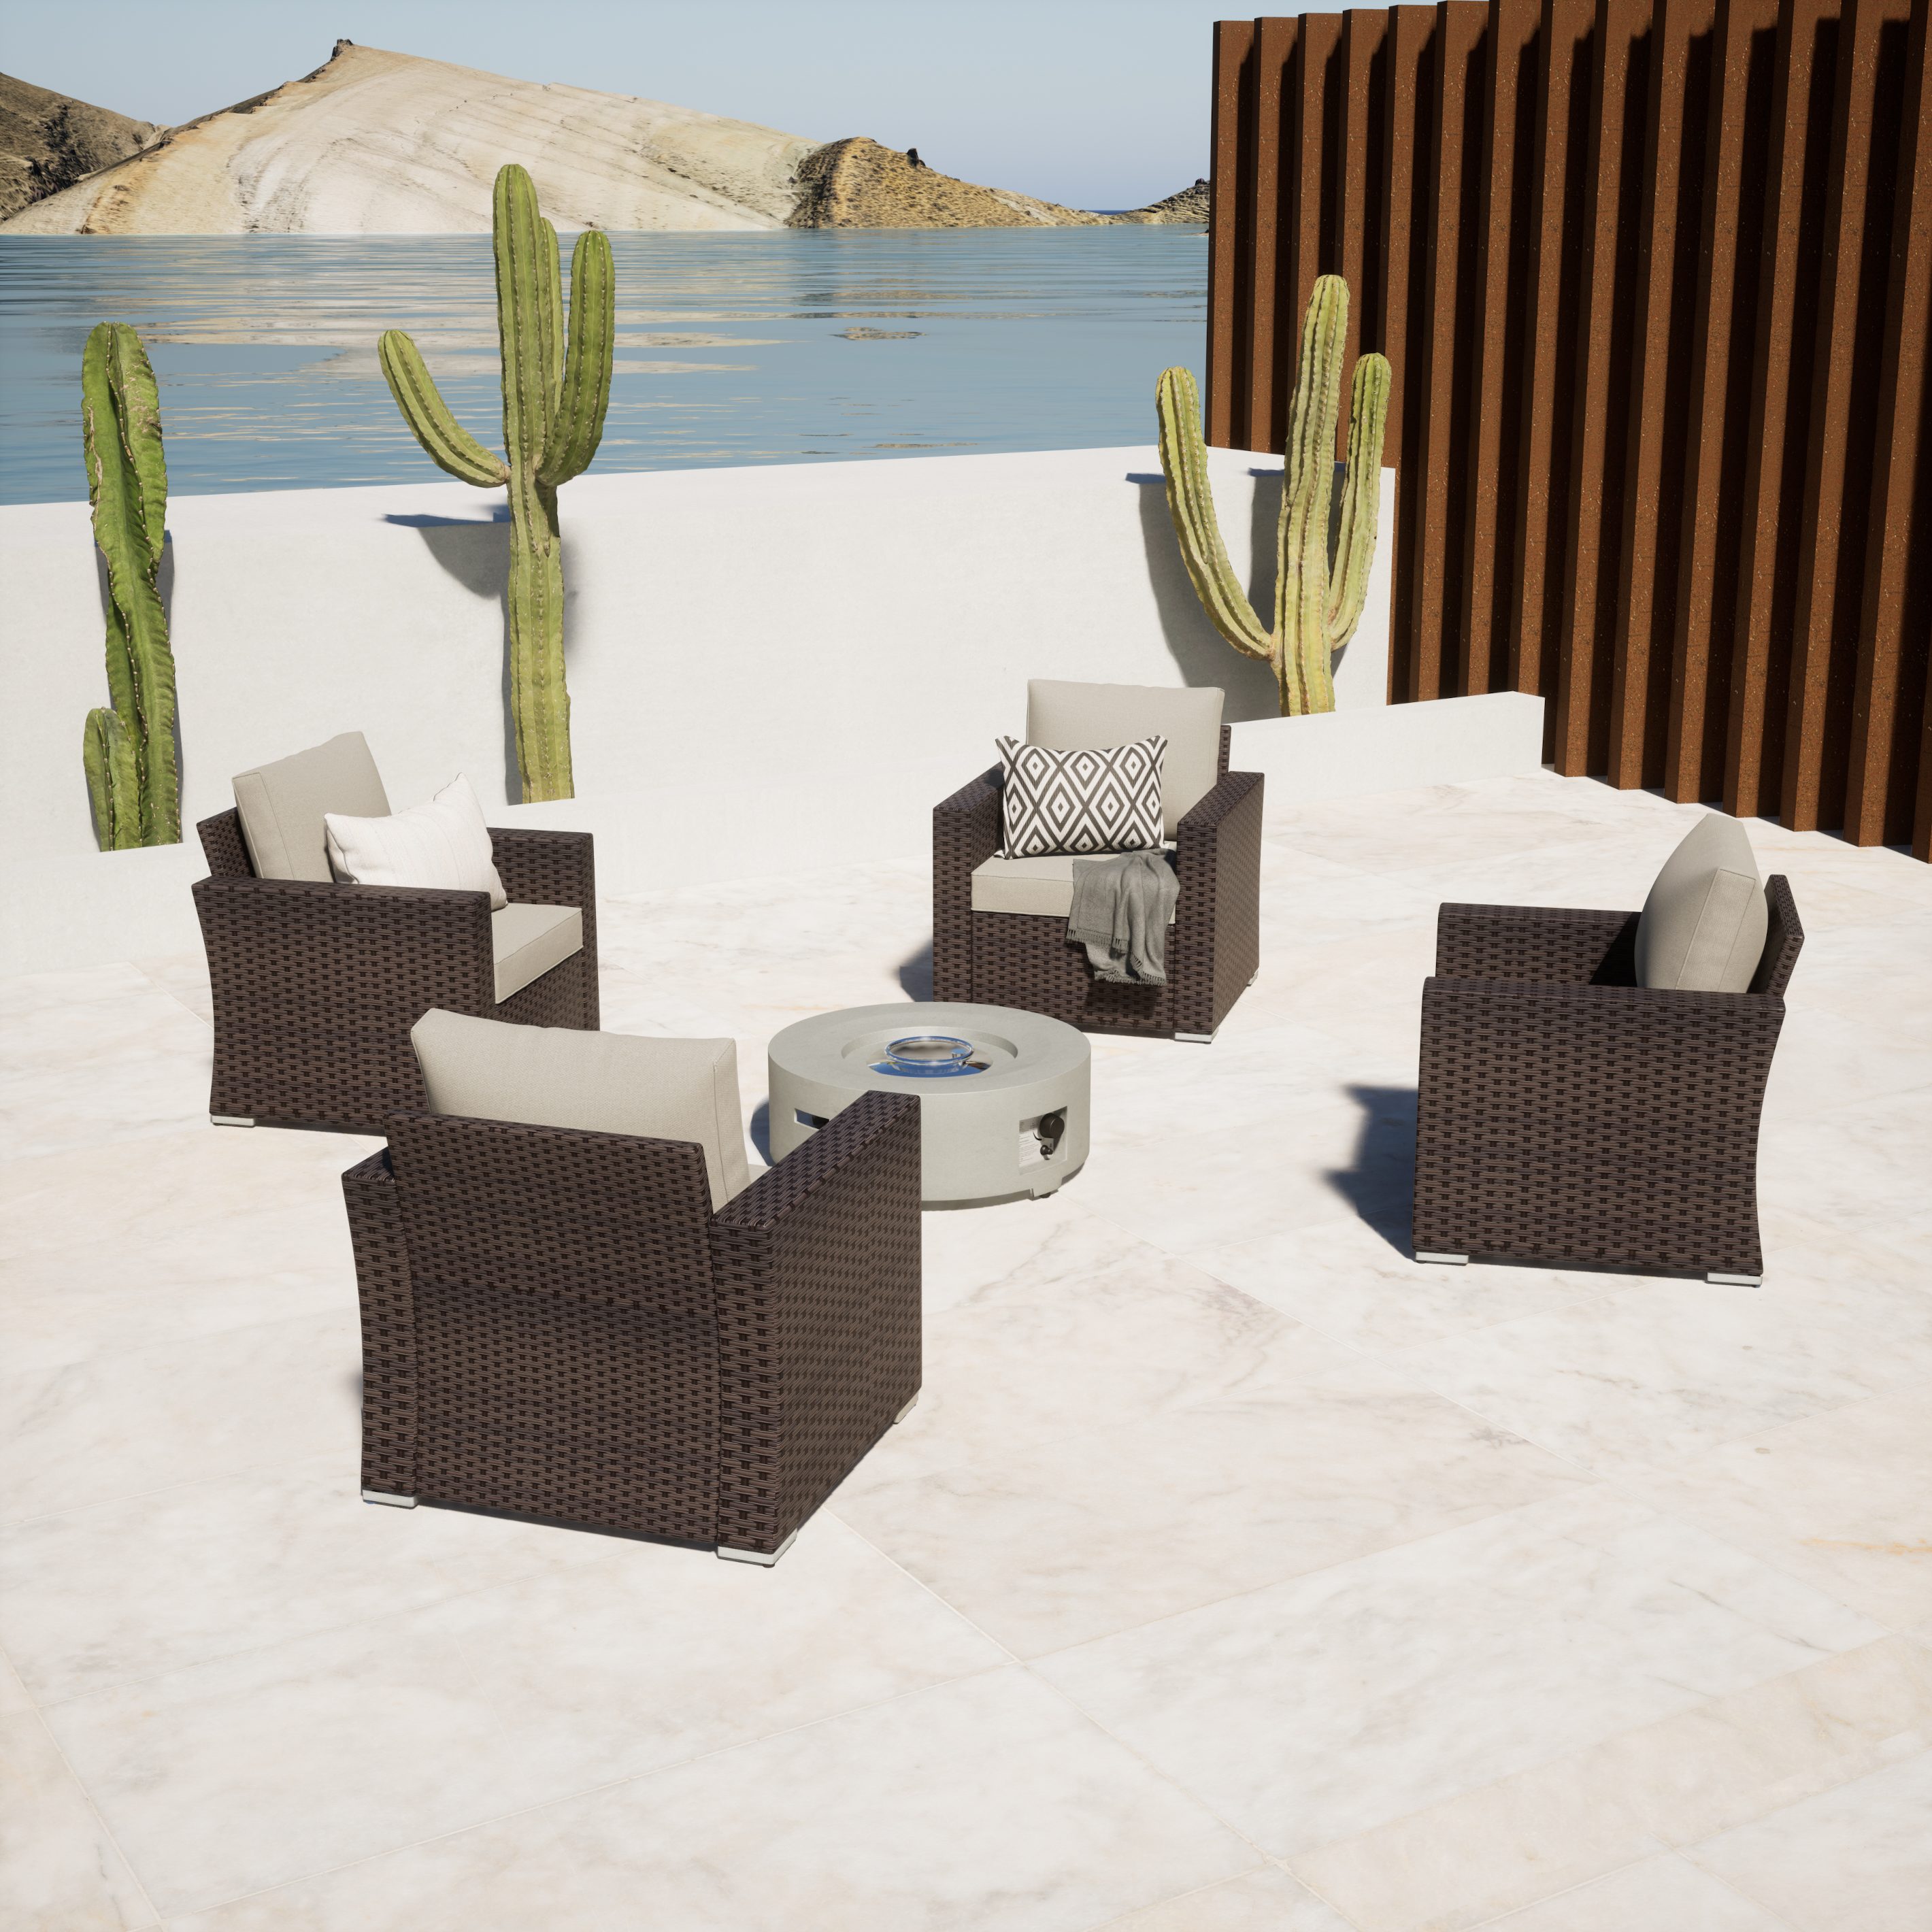 Eastlake 5 - Person Outdoor Seating Group with Cushions - 4 Seat